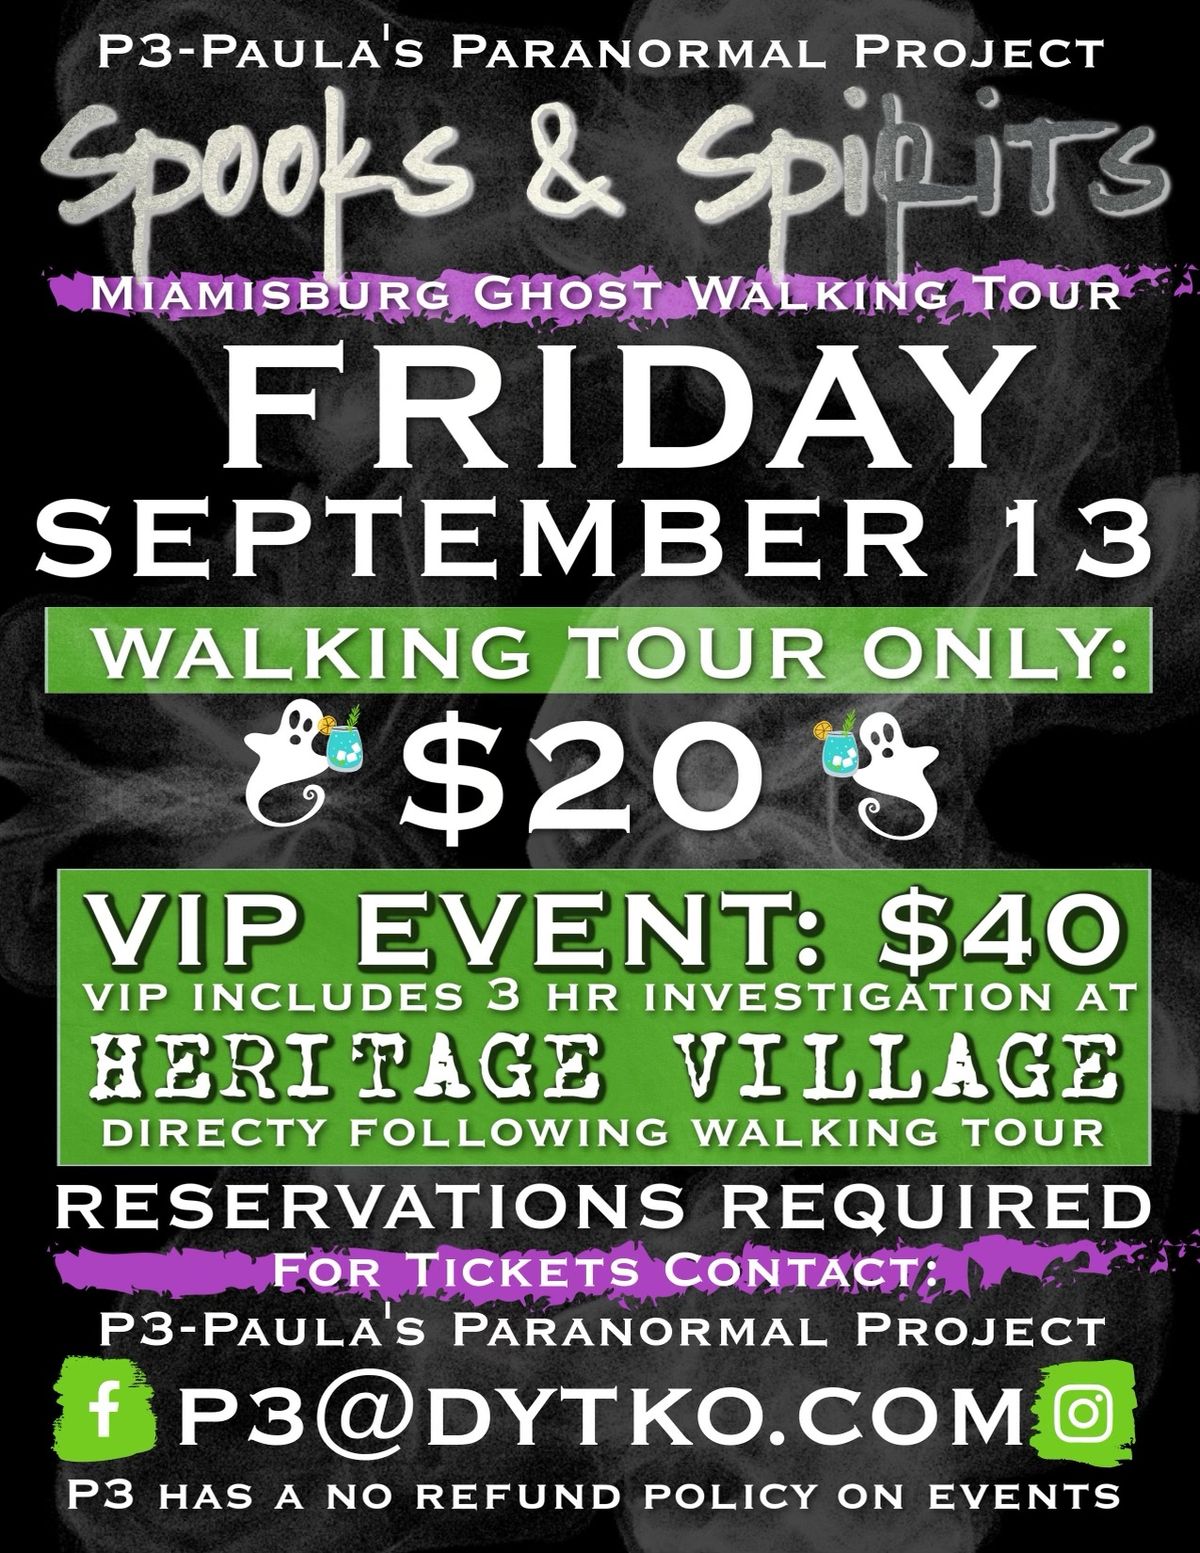 Miamisburg Spooks & Spirits Ghost Walking Tour with XTREME VIP Exclusive GhostHunt Opportunity! 